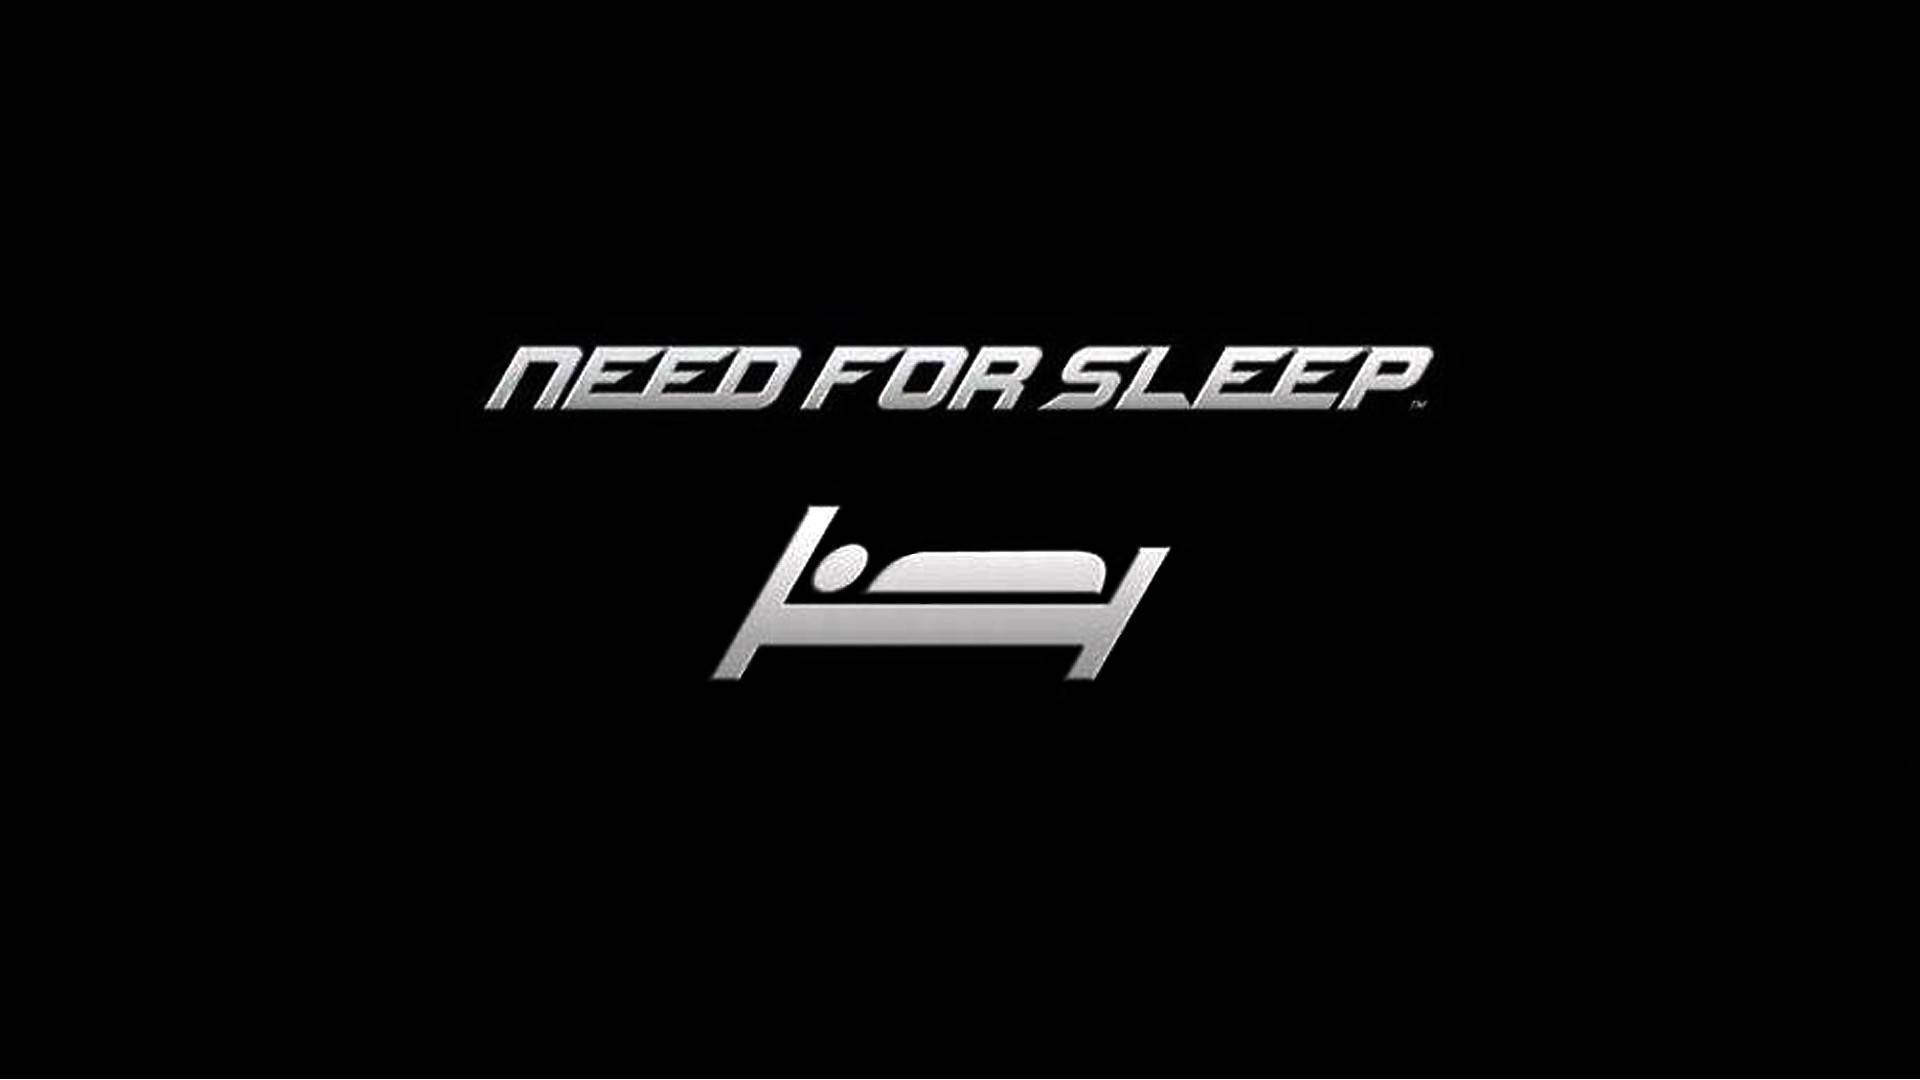 Just Free Wallpaperz: Need for Sleep